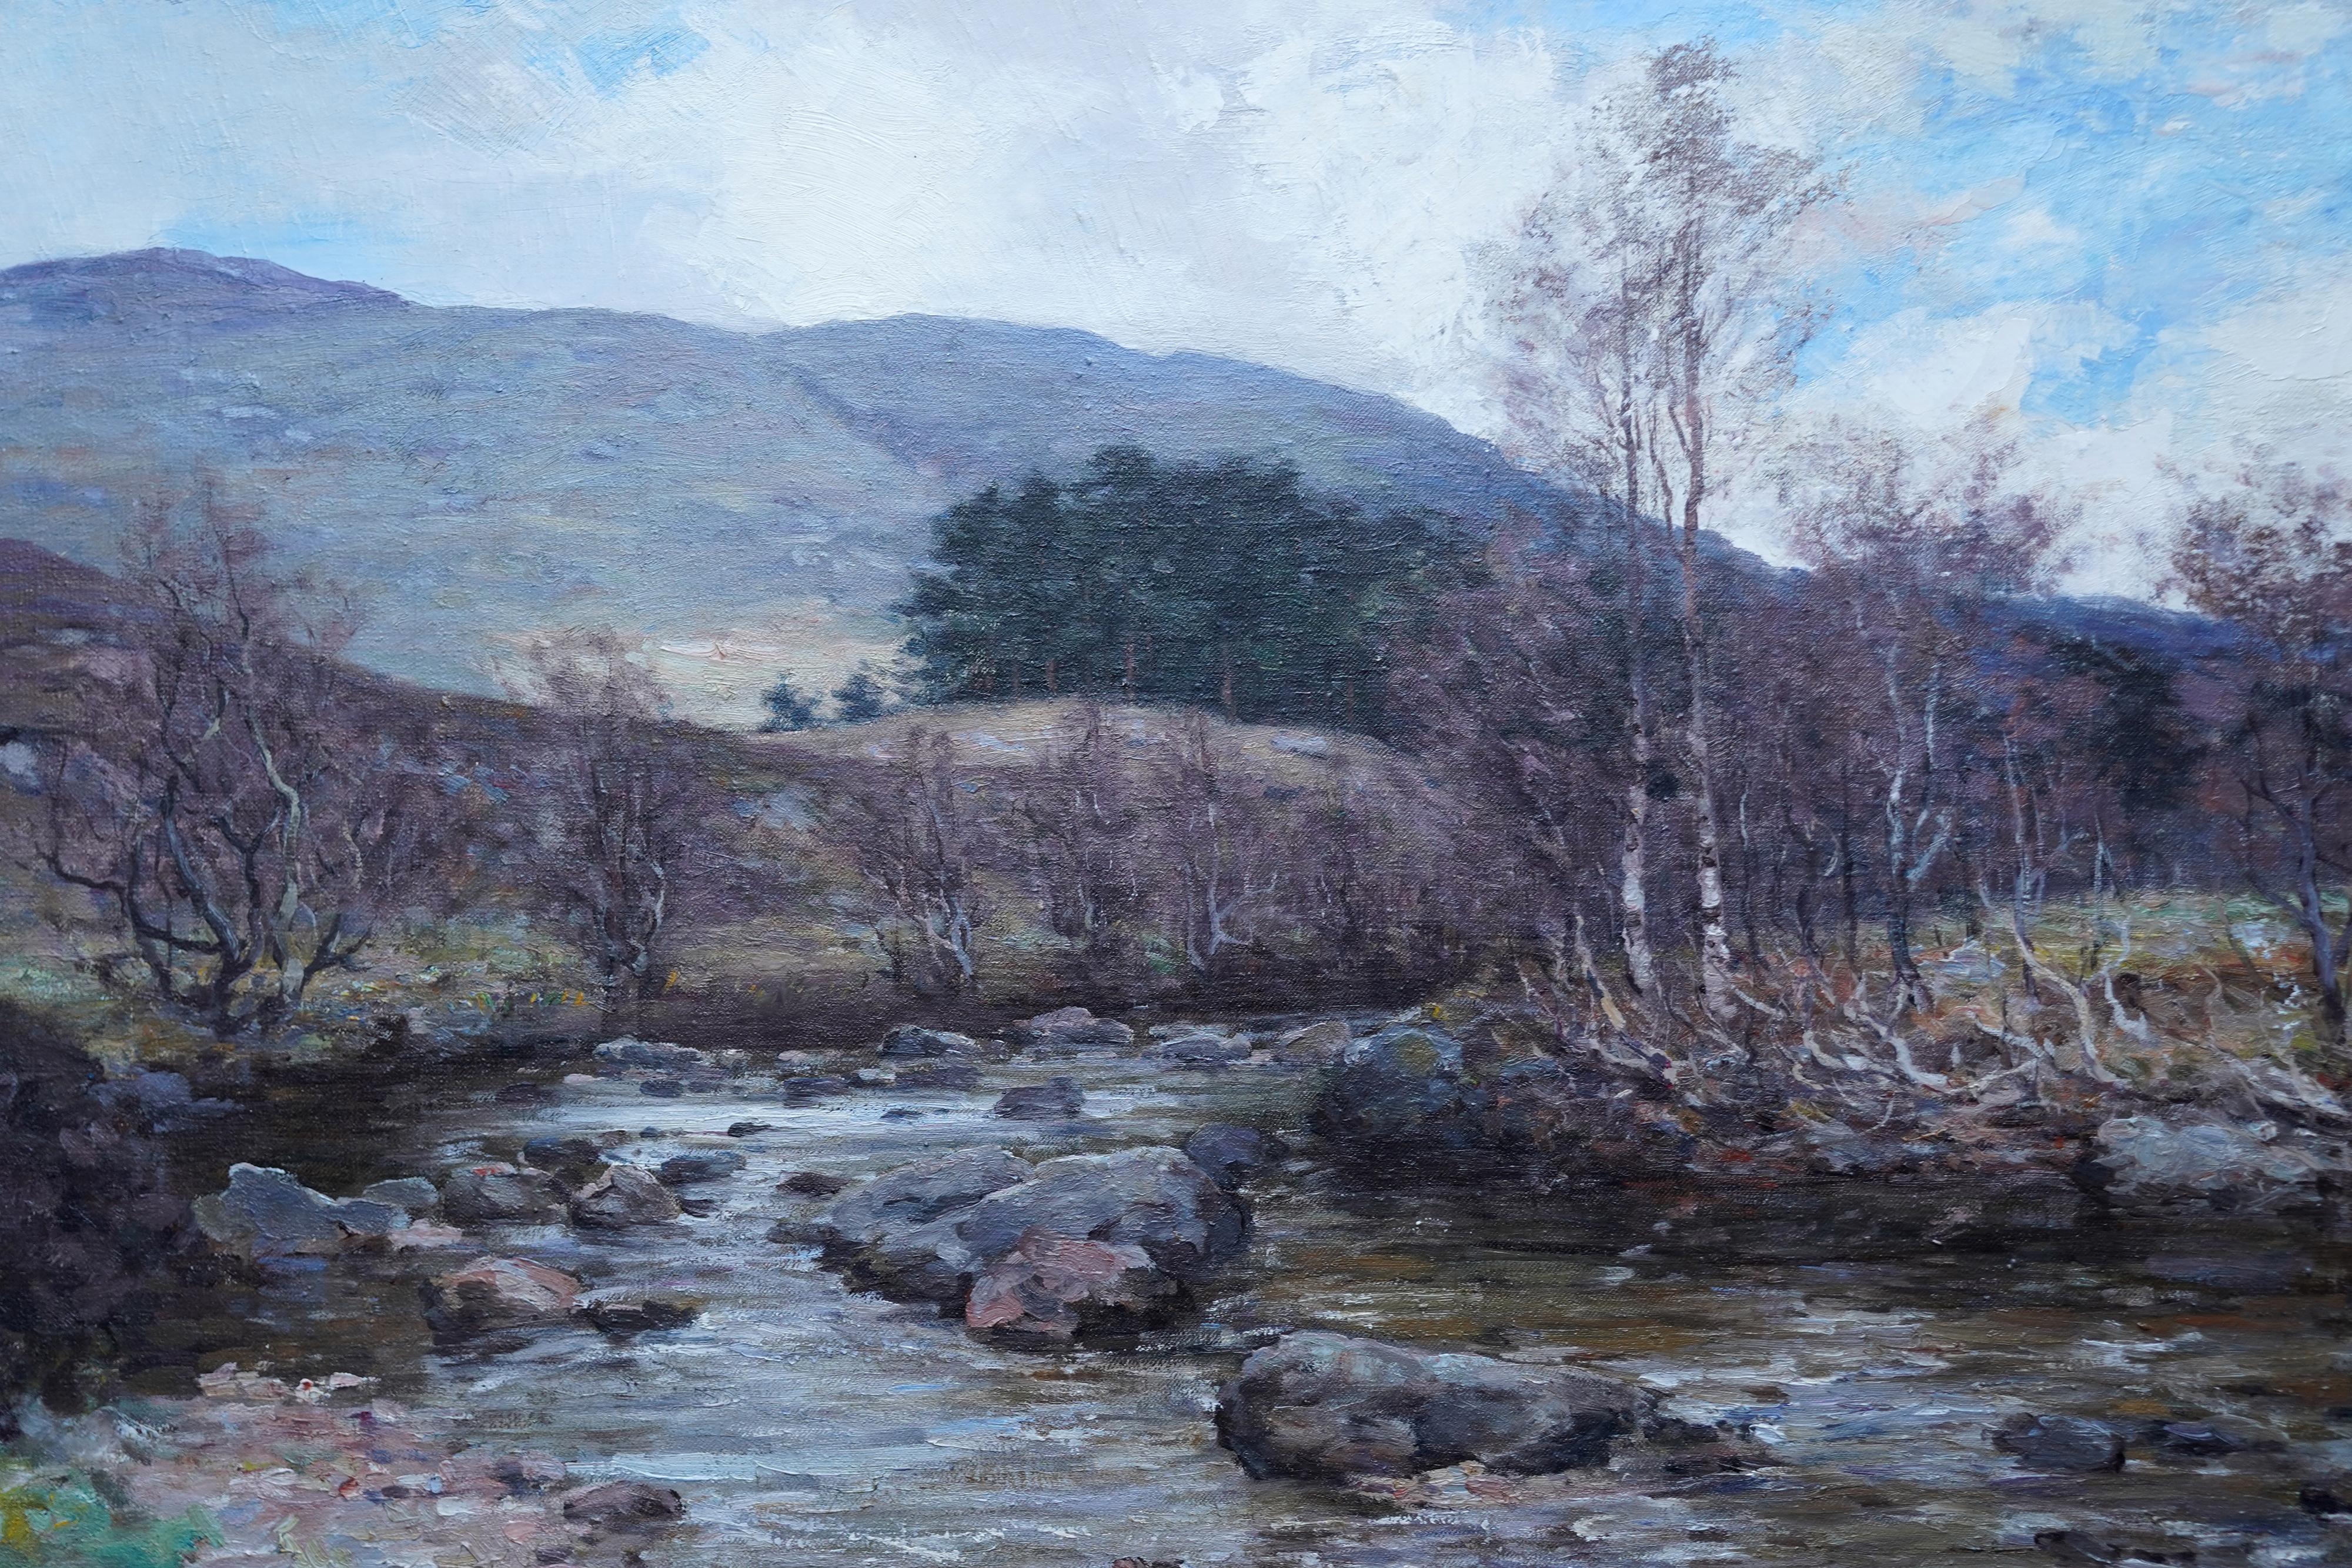 This superb, large Scottish Impressionist exhibited landscape oil painting is by noted artist Joseph Morris Henderson. It was painted in 1923 and exhibited at the Glasgow Institute of Fine Art that year. The location is Balquhidder in Scotland, a